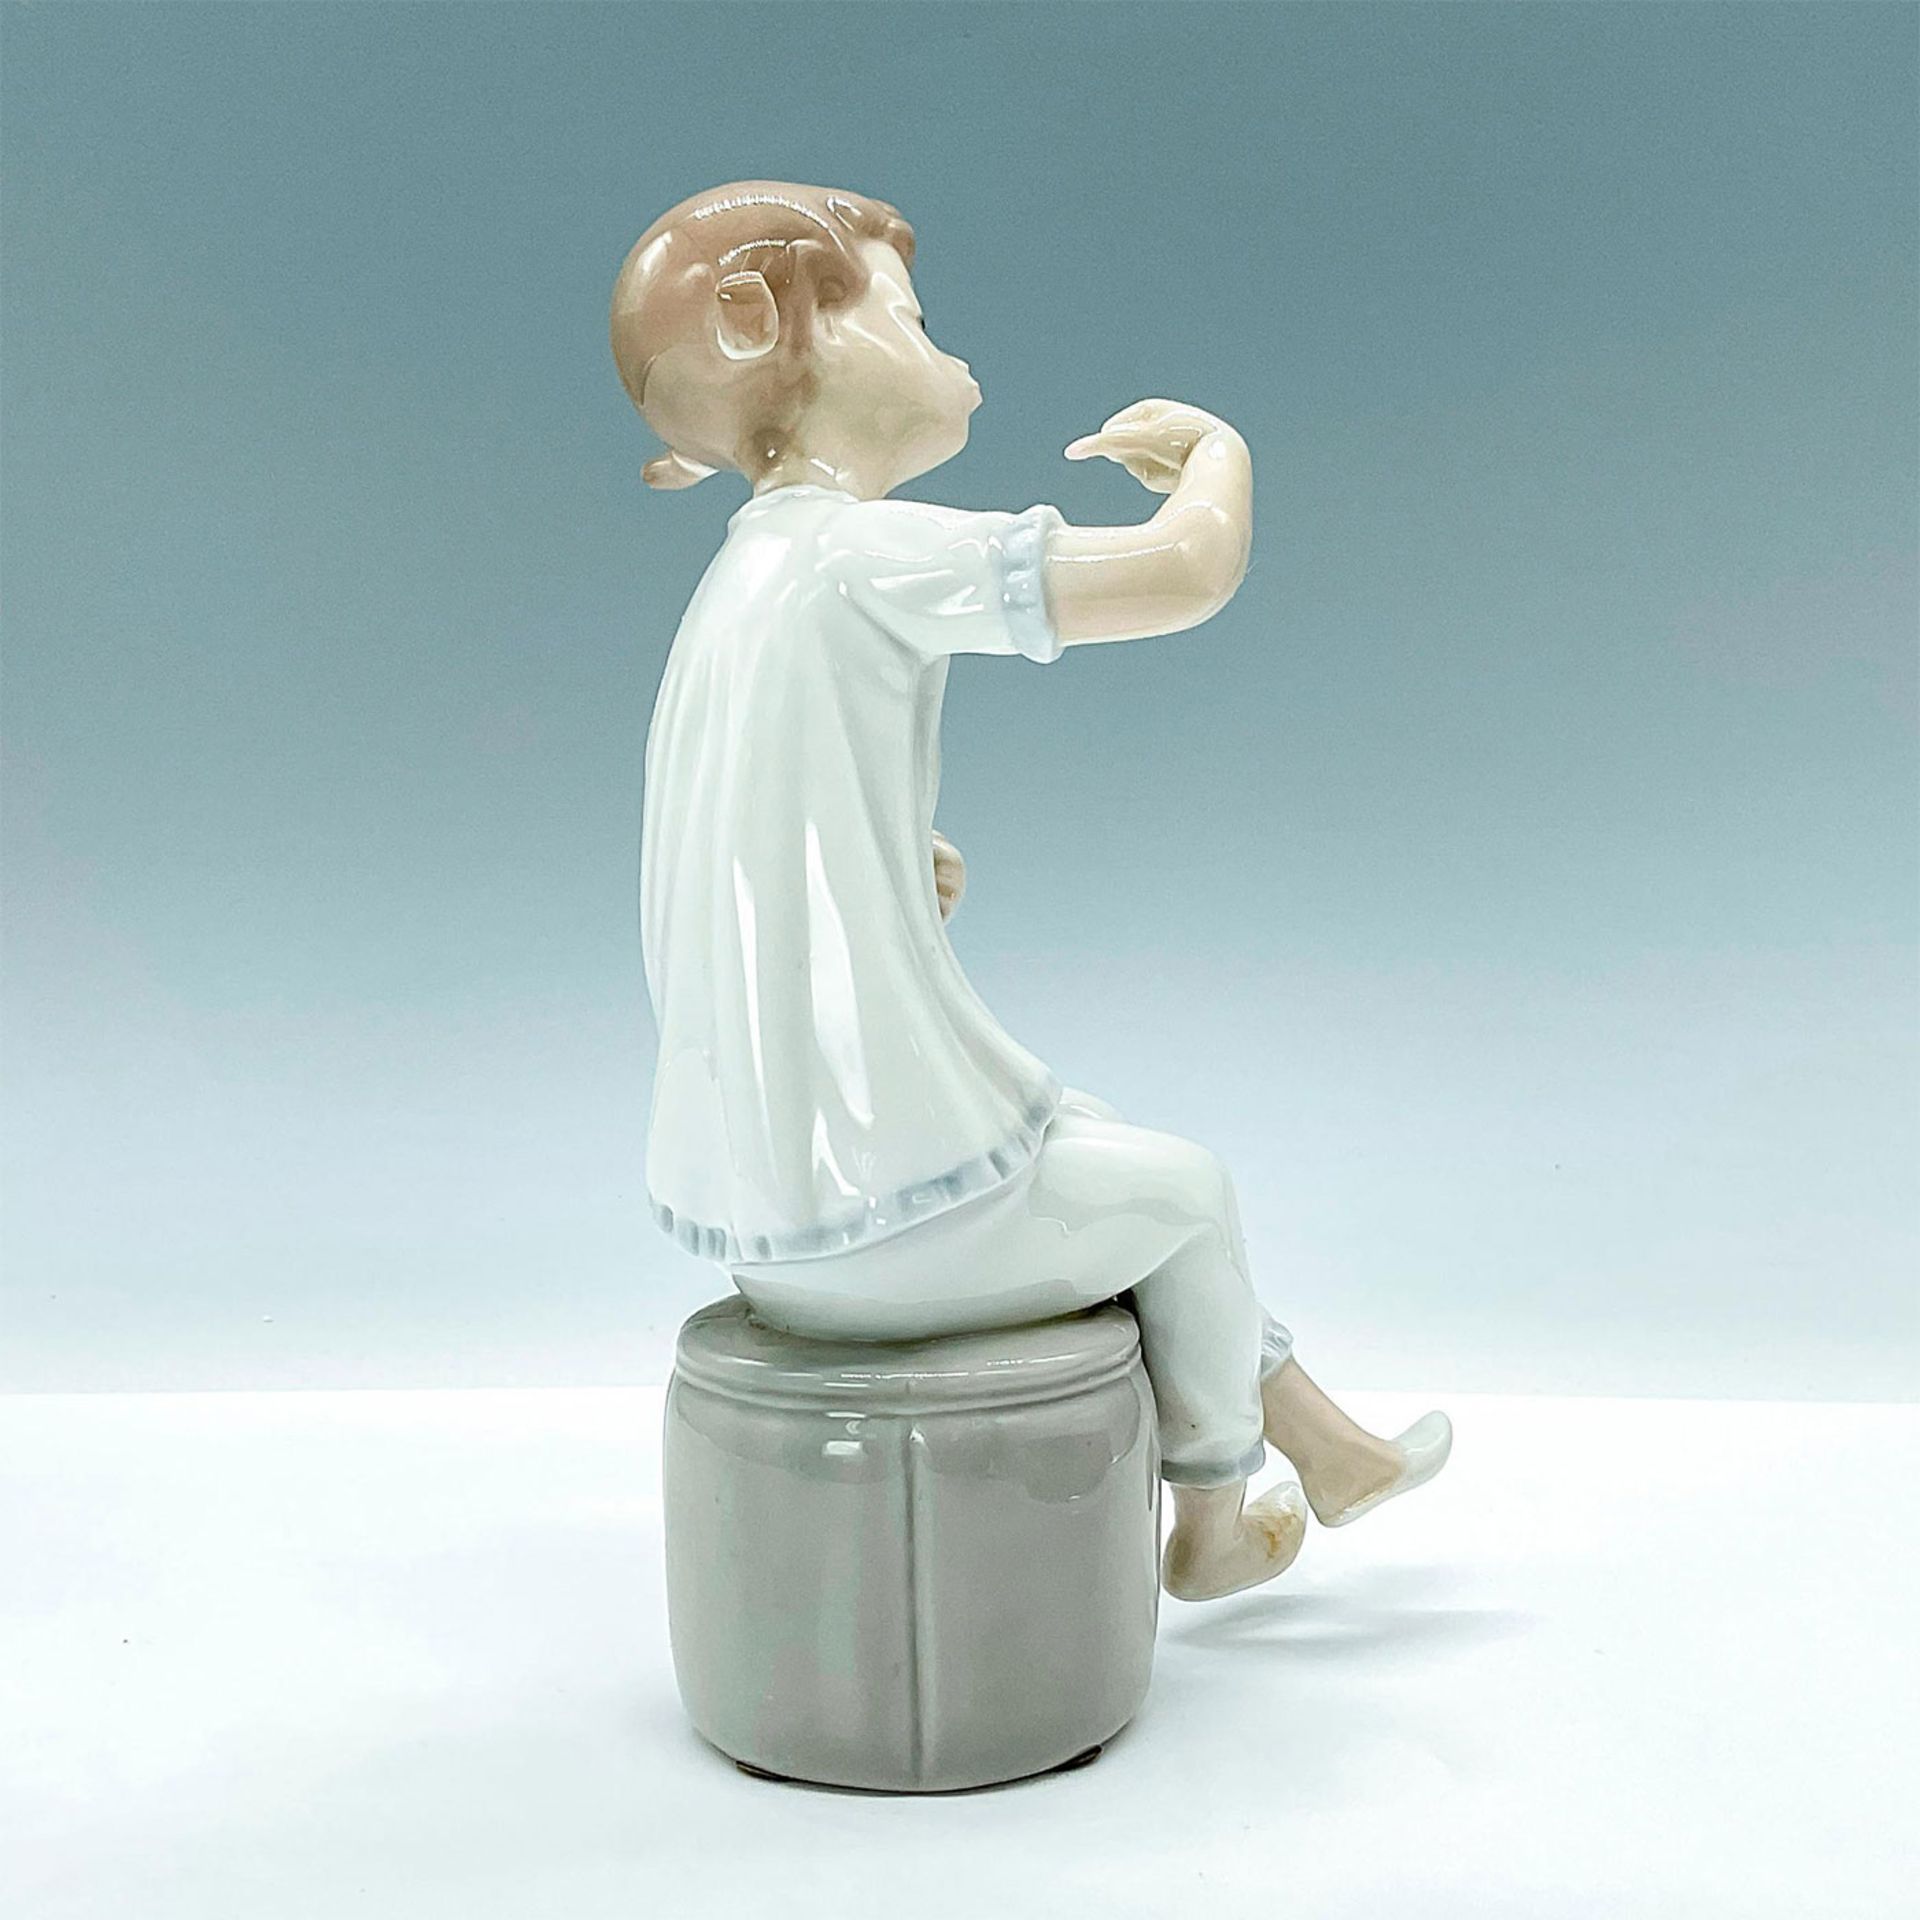 Girl With Doll 1001083 - Lladro Porcelain Figurine - Image 2 of 3